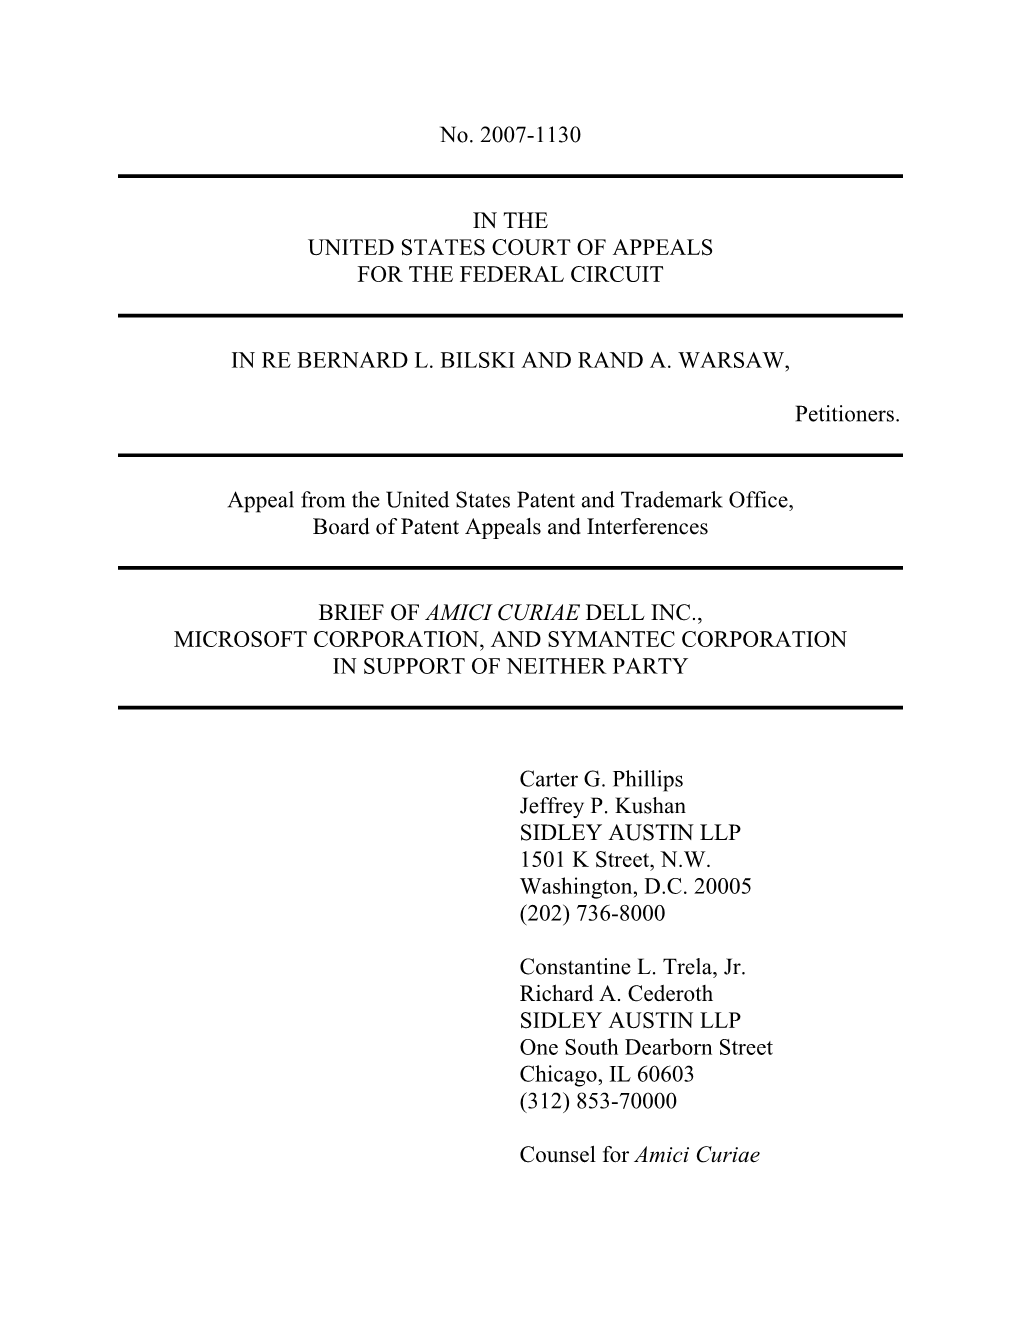 No. 2007-1130 in the UNITED STATES COURT of APPEALS